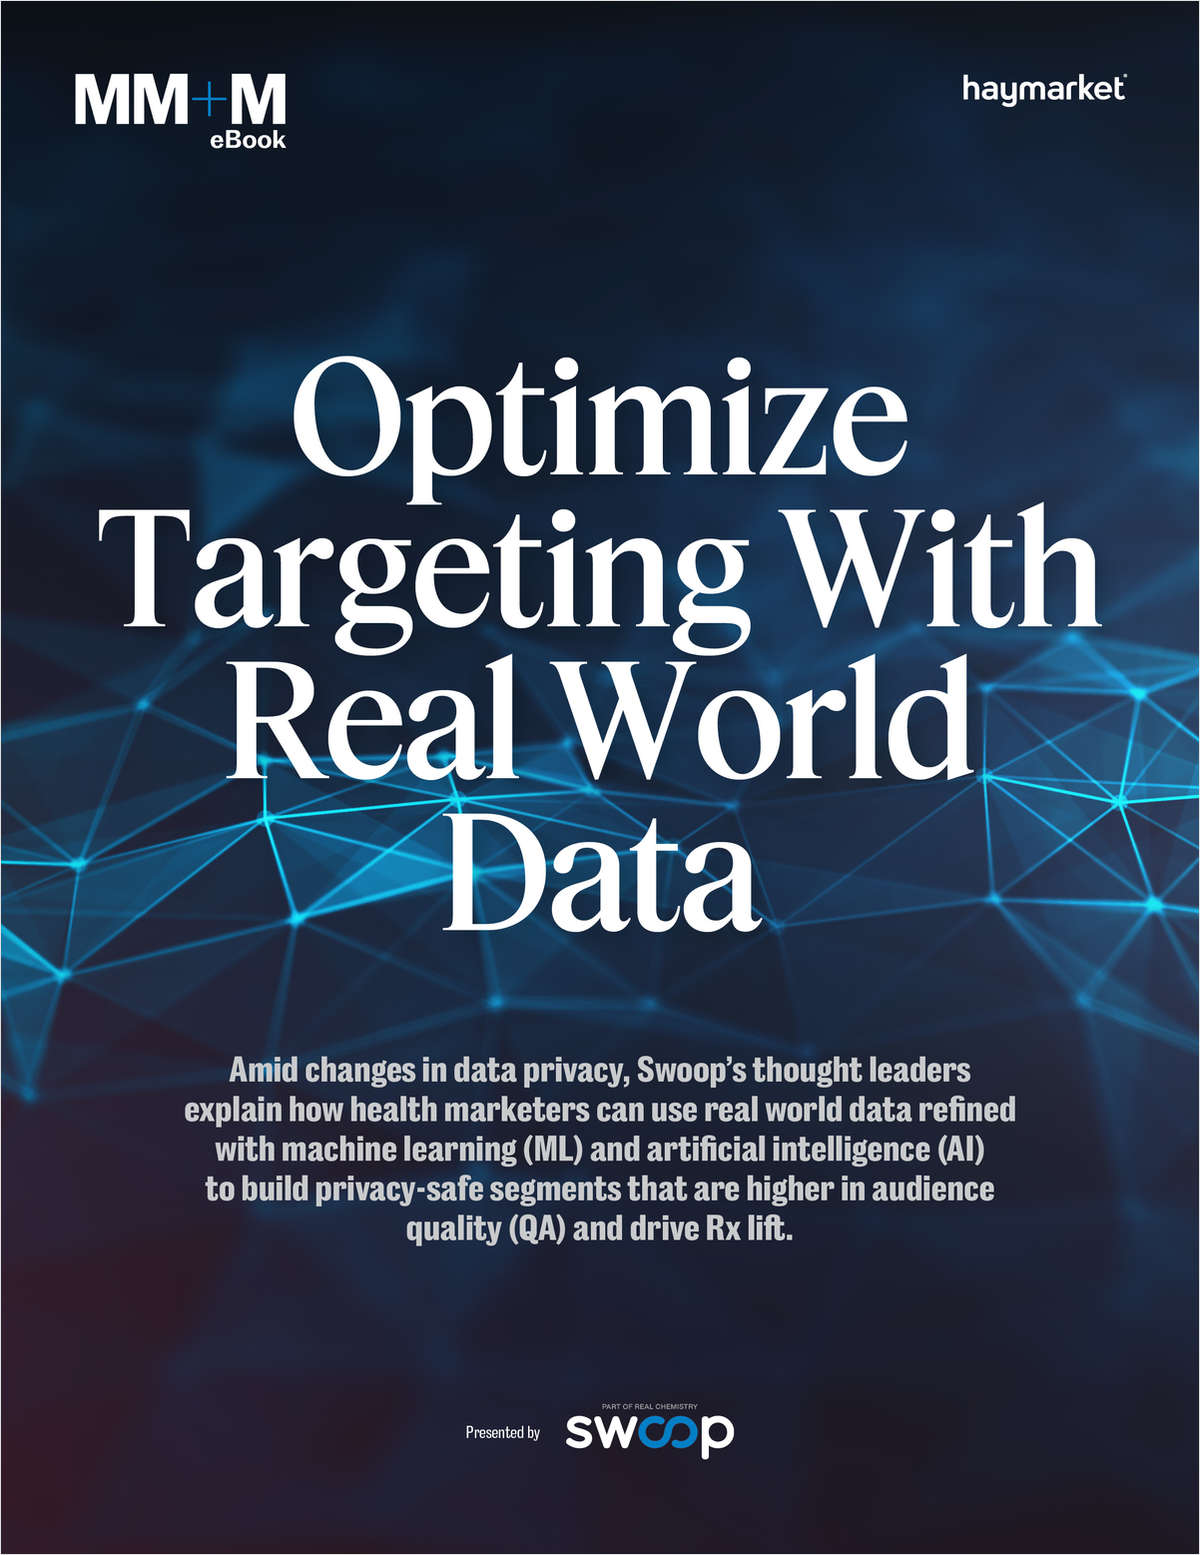 Optimize Targeting With Real World Data